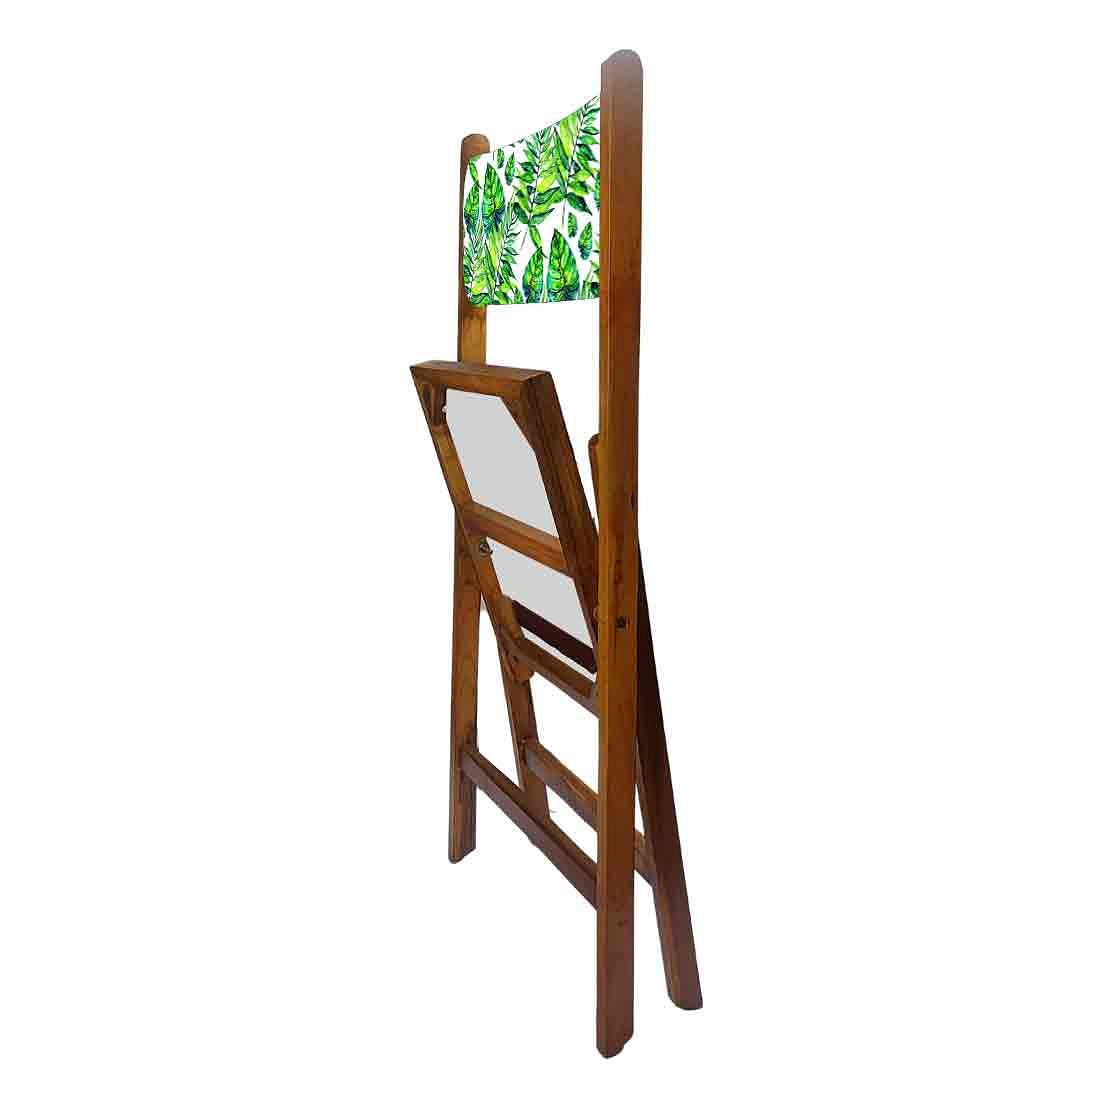 Nutcase Wooden Chairs For Balcony Patio - Light Green Leaves Nutcase